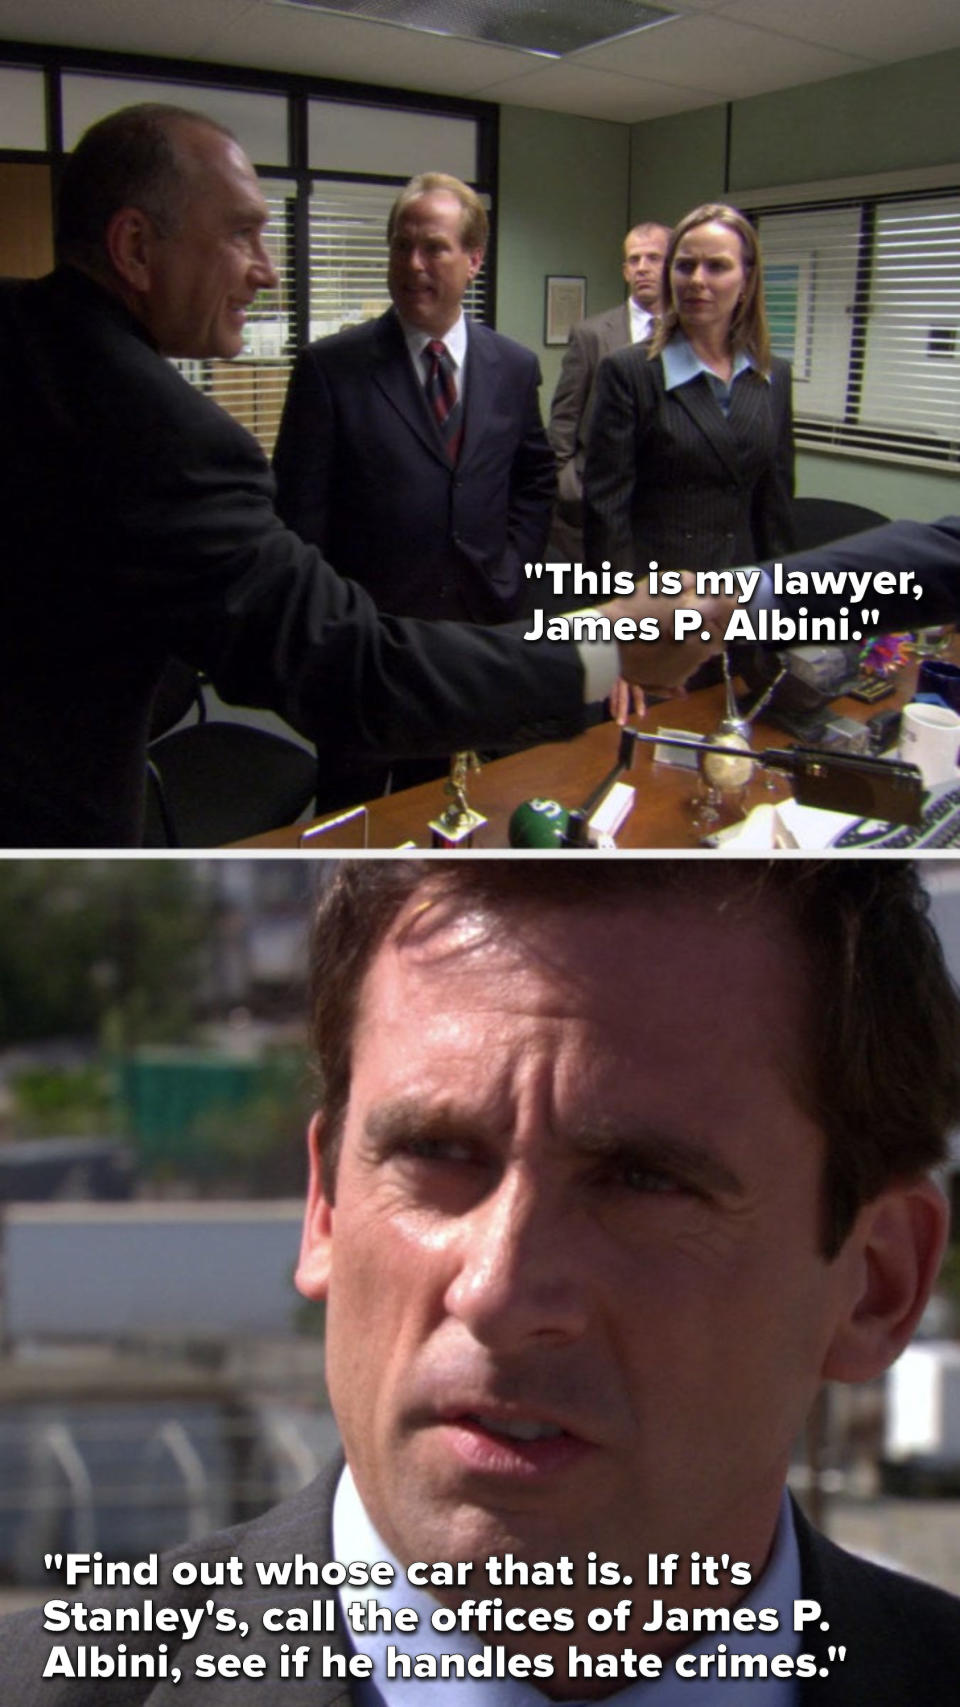 Michael says, "This is my lawyer, James P Albini," then in Season 3 he says, "Find out whose car that is, if it's Stanley's, call the offices of James P Albini, see if he handles hate crimes"